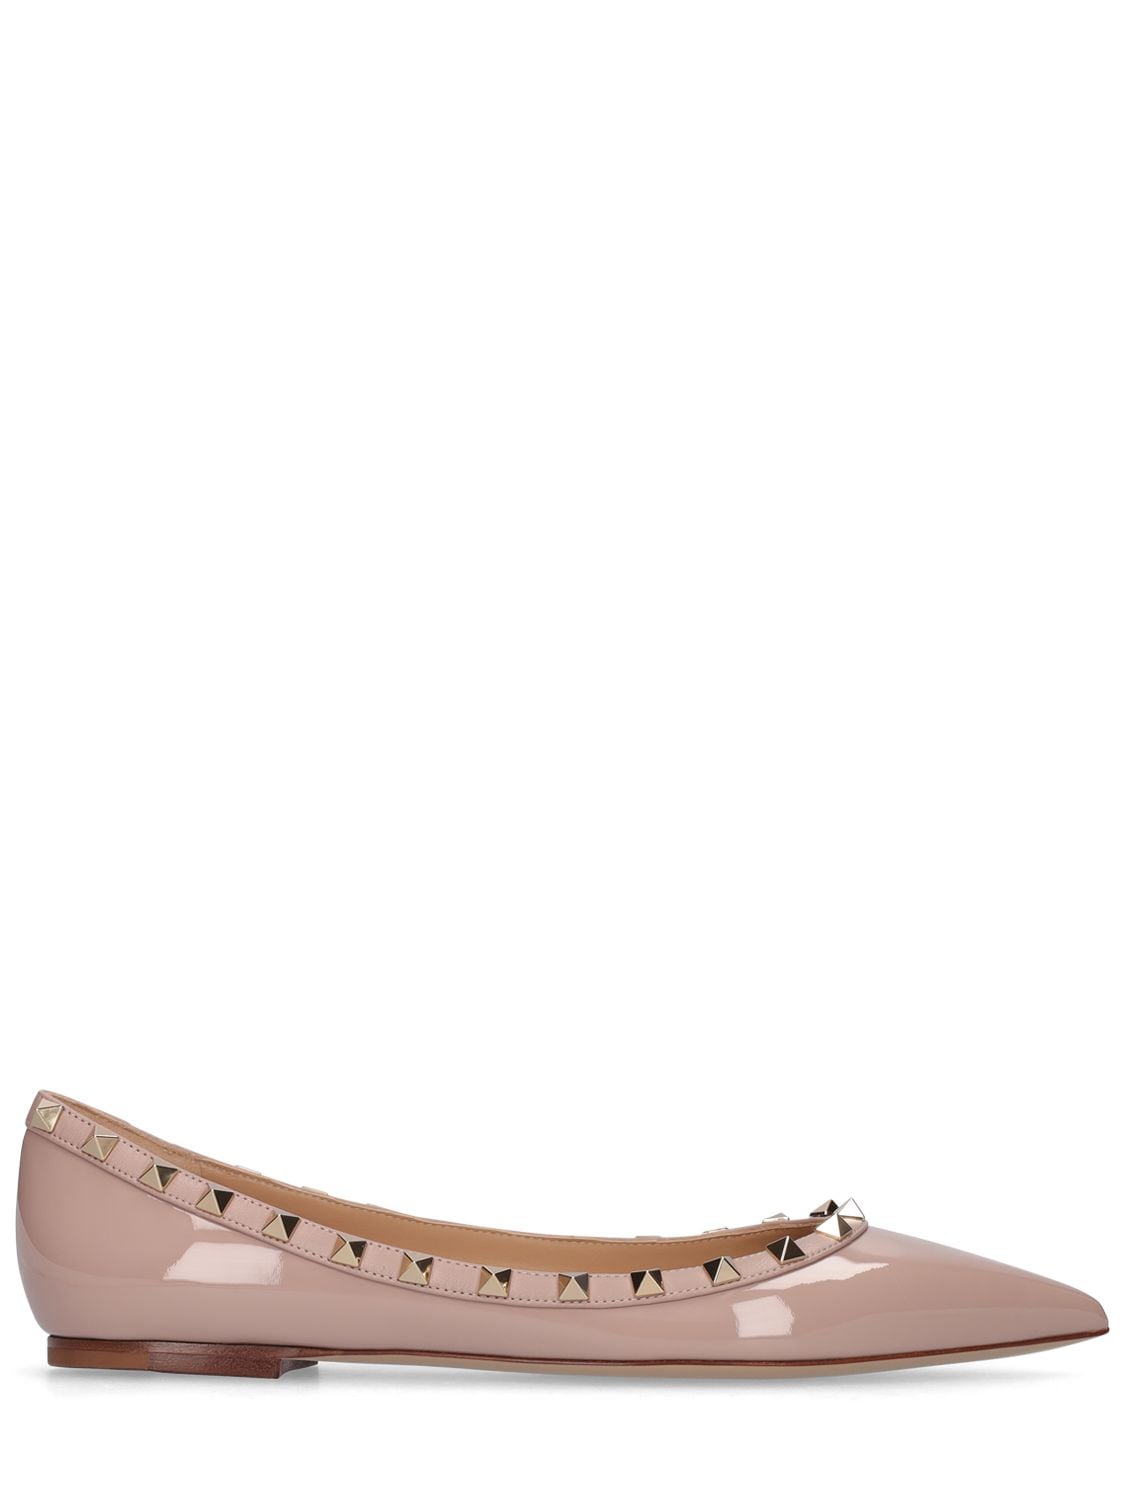 Image of 10mm Rockstud Patent Leather Flats